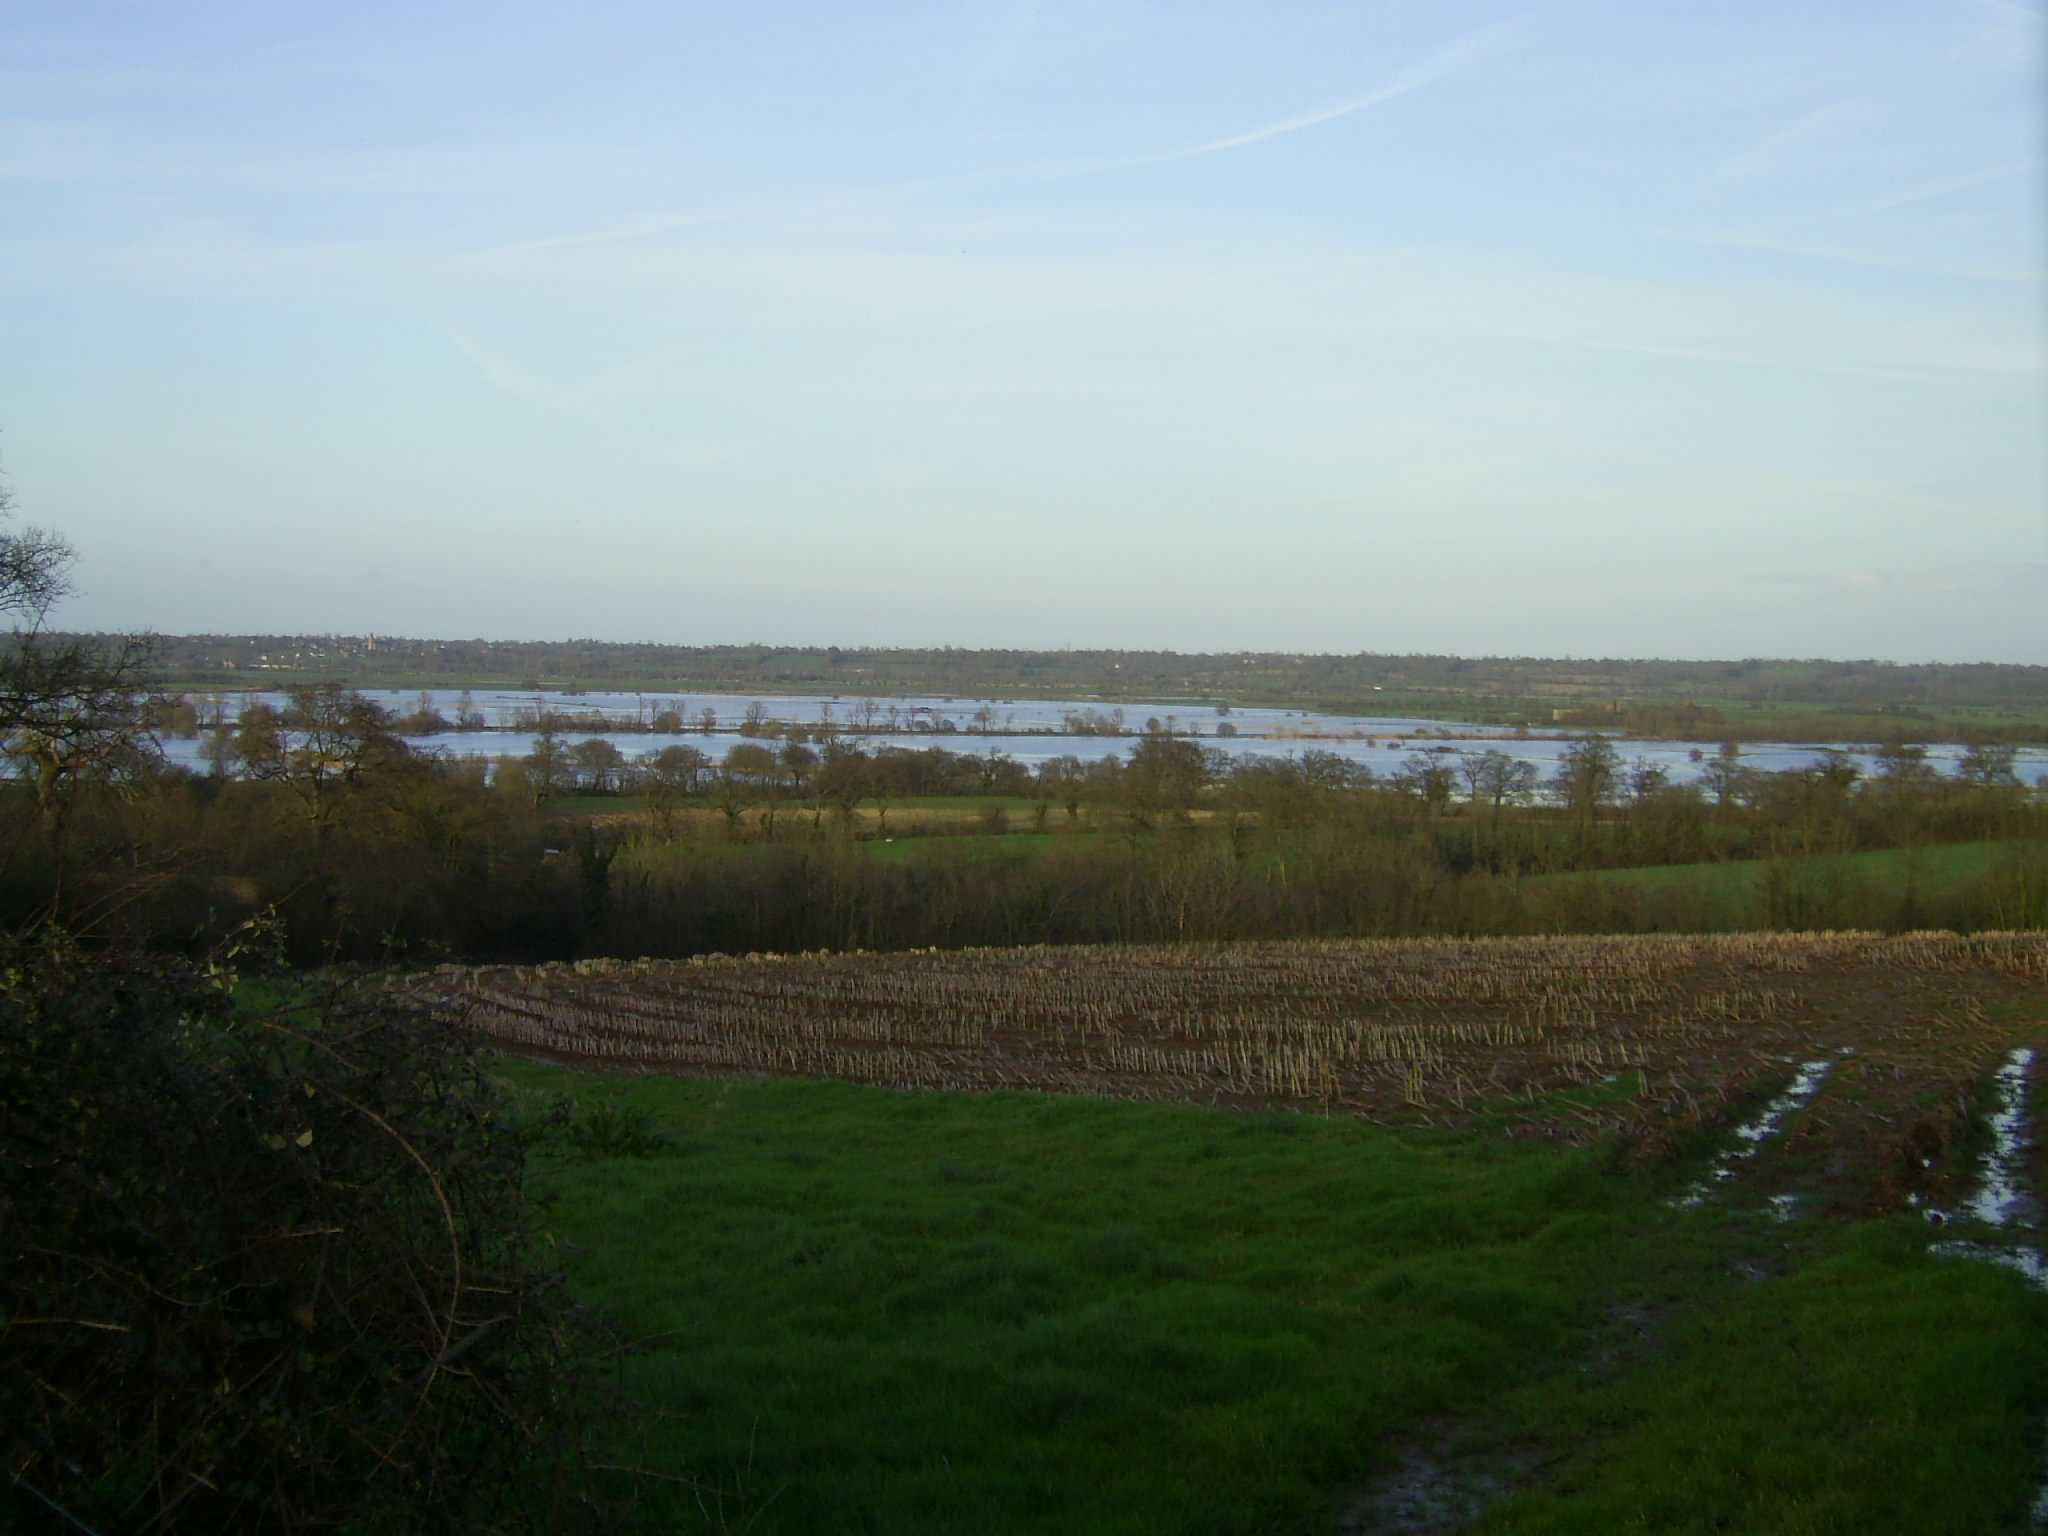 Regional Nature Park of the Bessin and Cotentin Marshes, Normandy